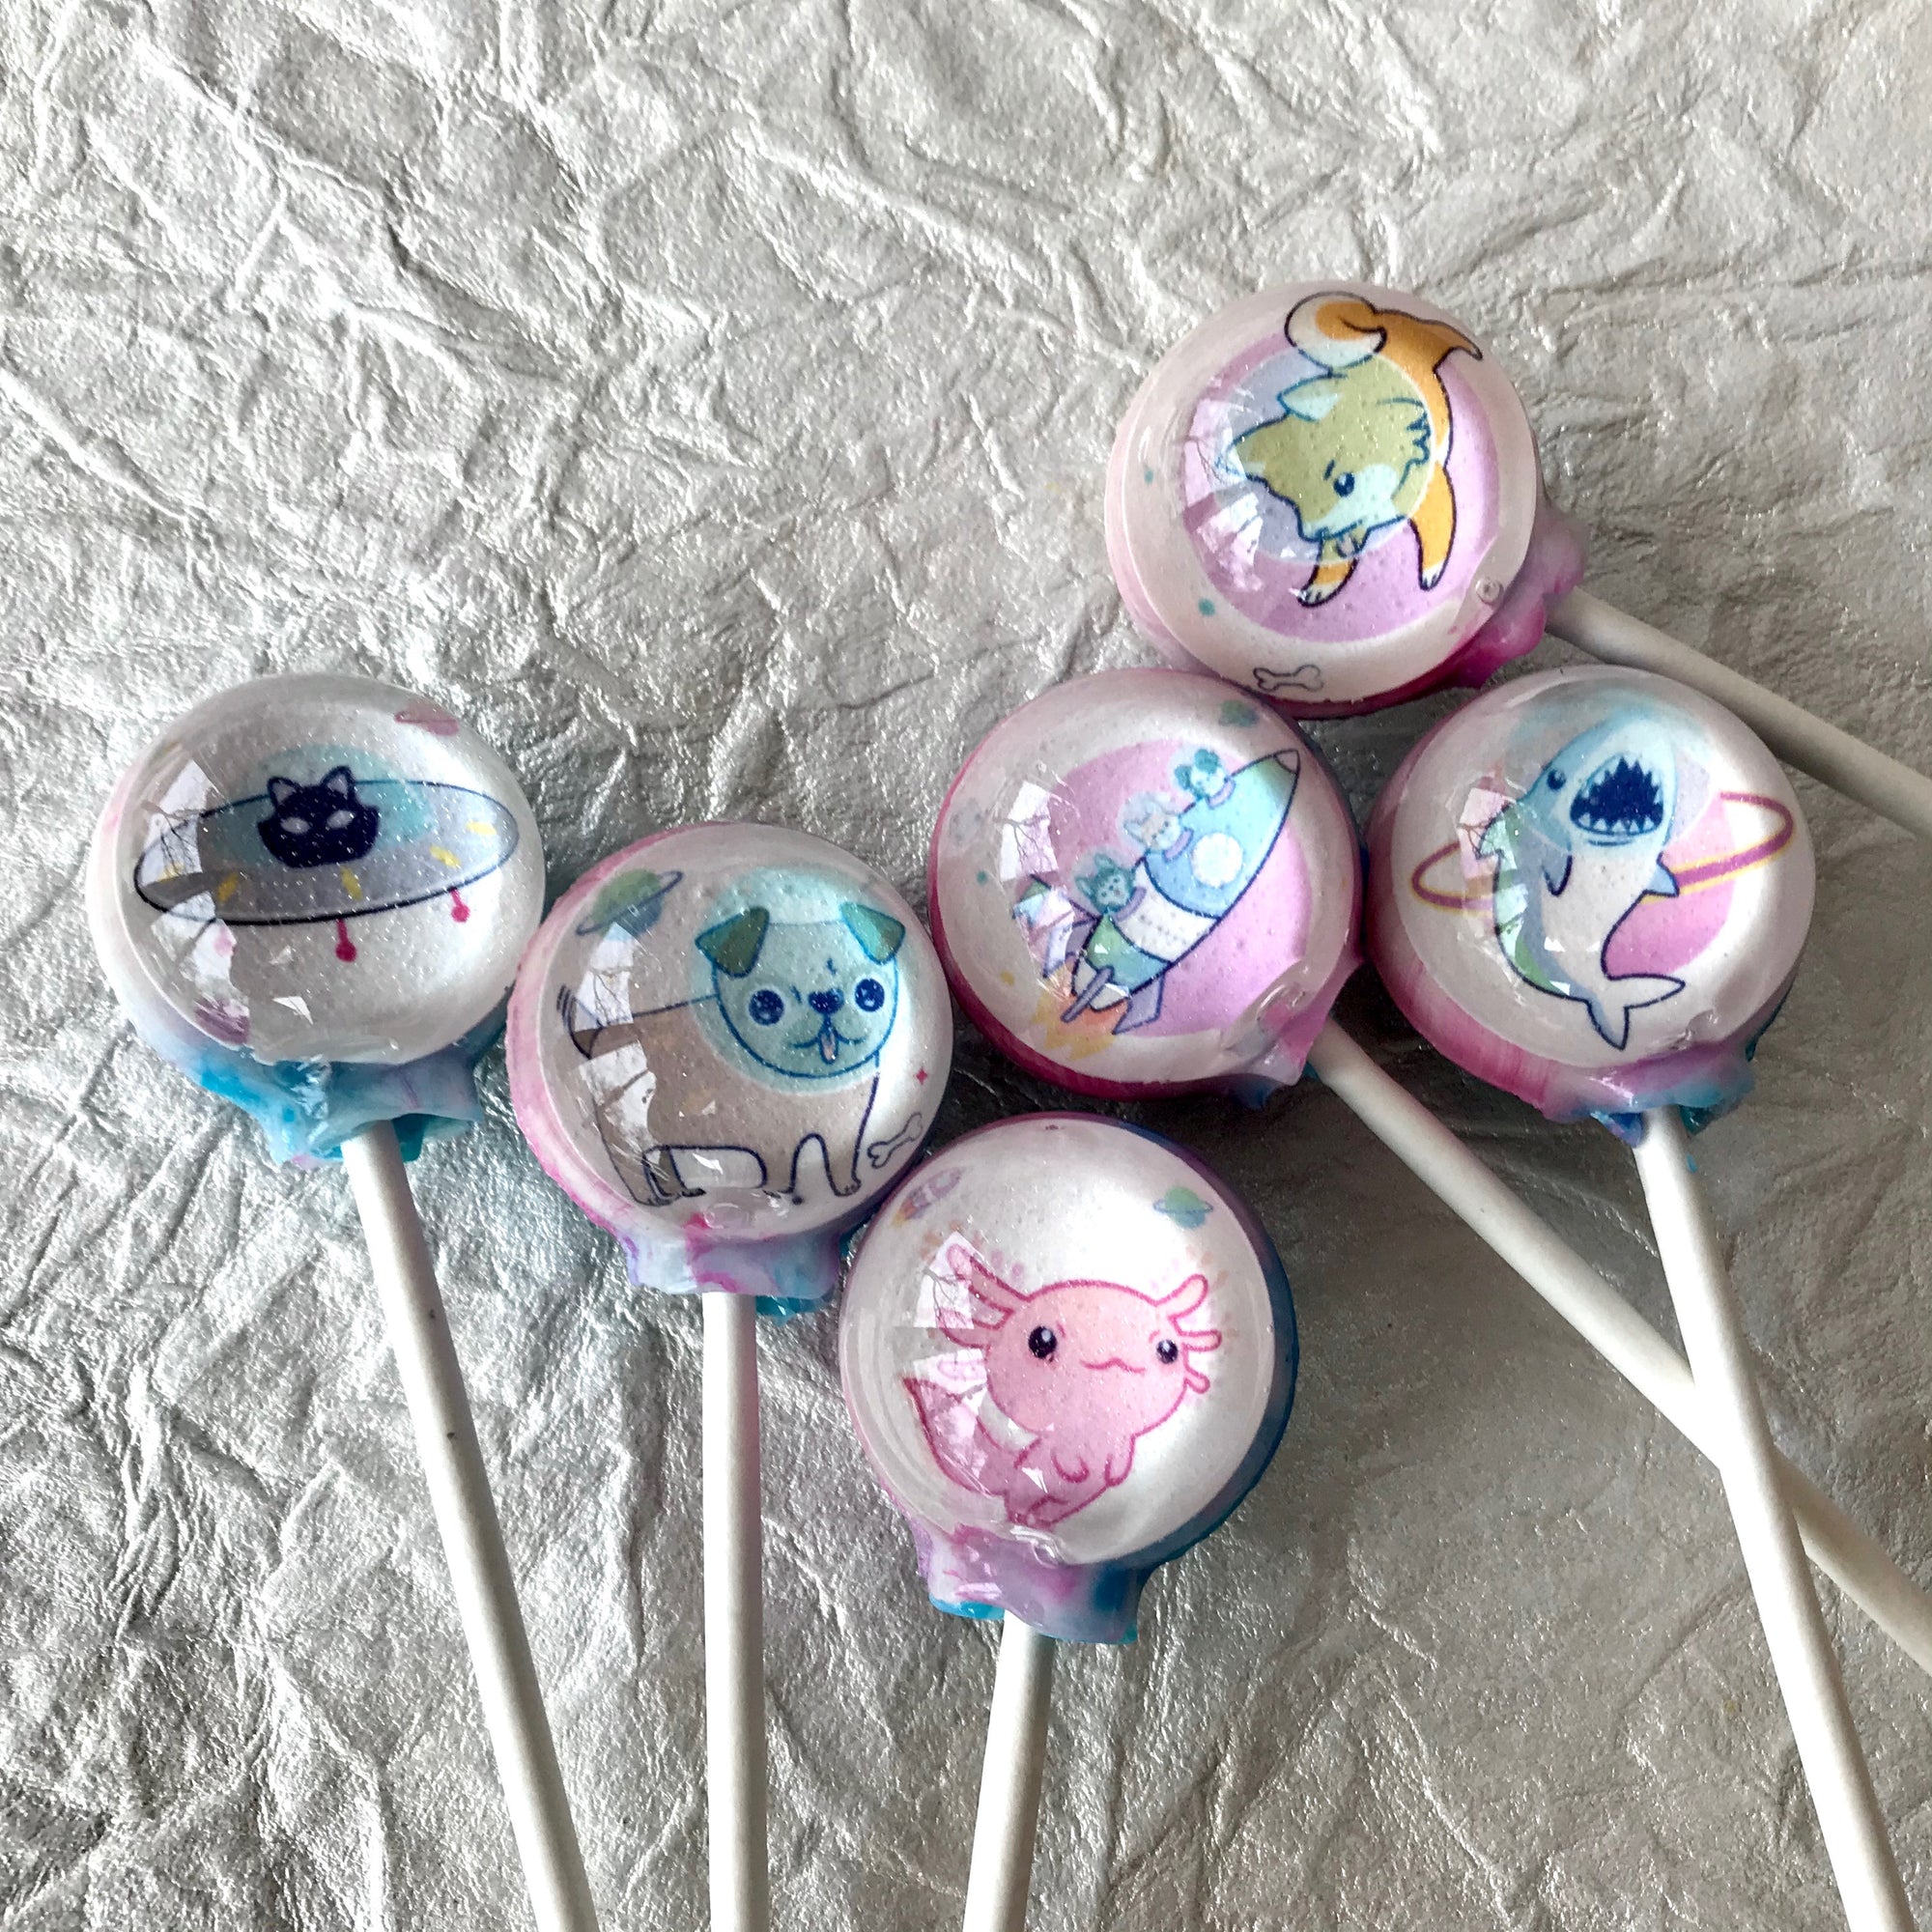 Galaxy of Critter Lollipops 5 or 6-piece set by I Want Candy!